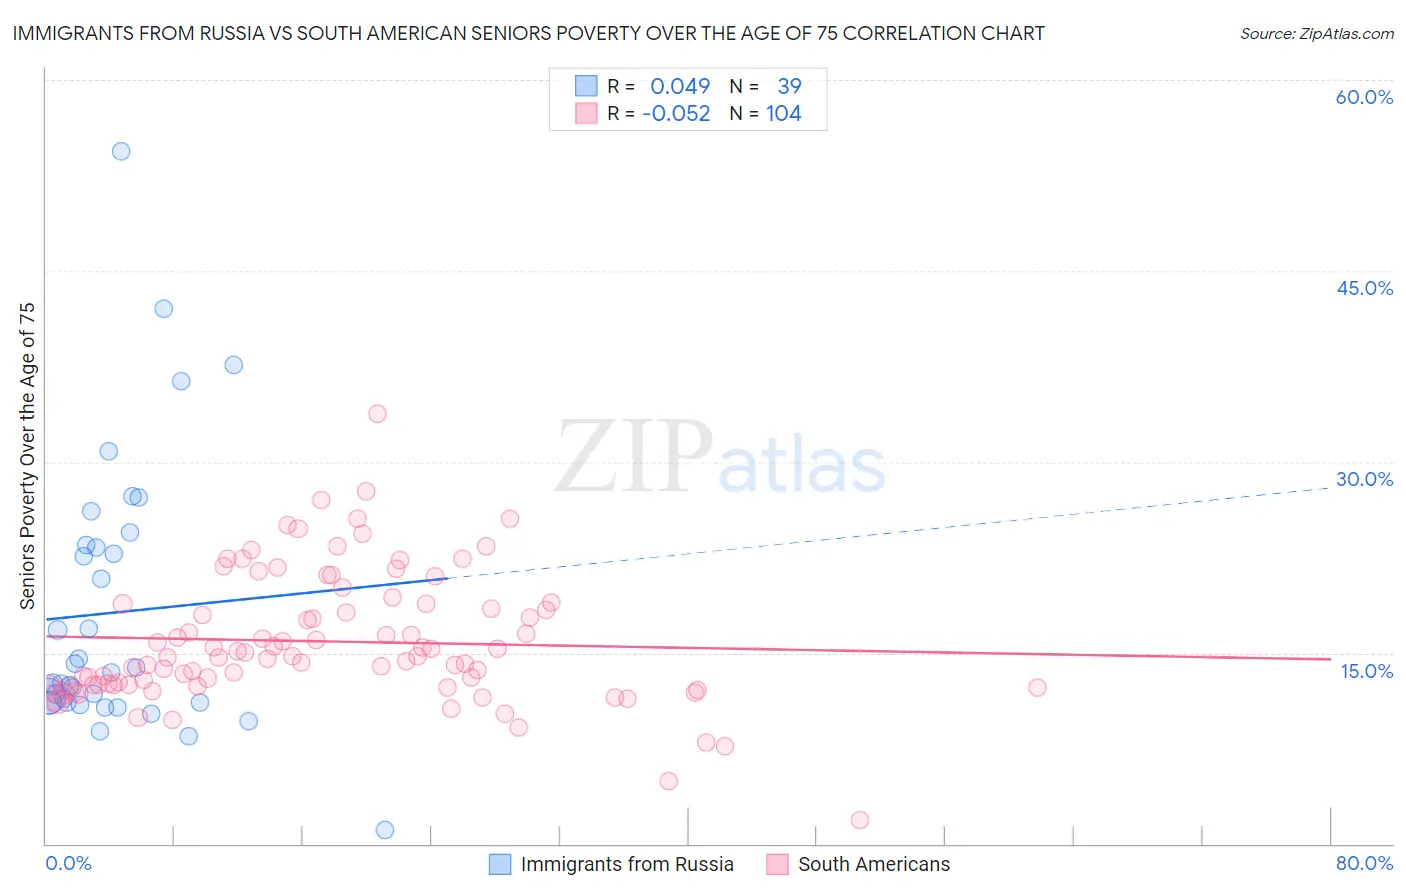 Immigrants from Russia vs South American Seniors Poverty Over the Age of 75